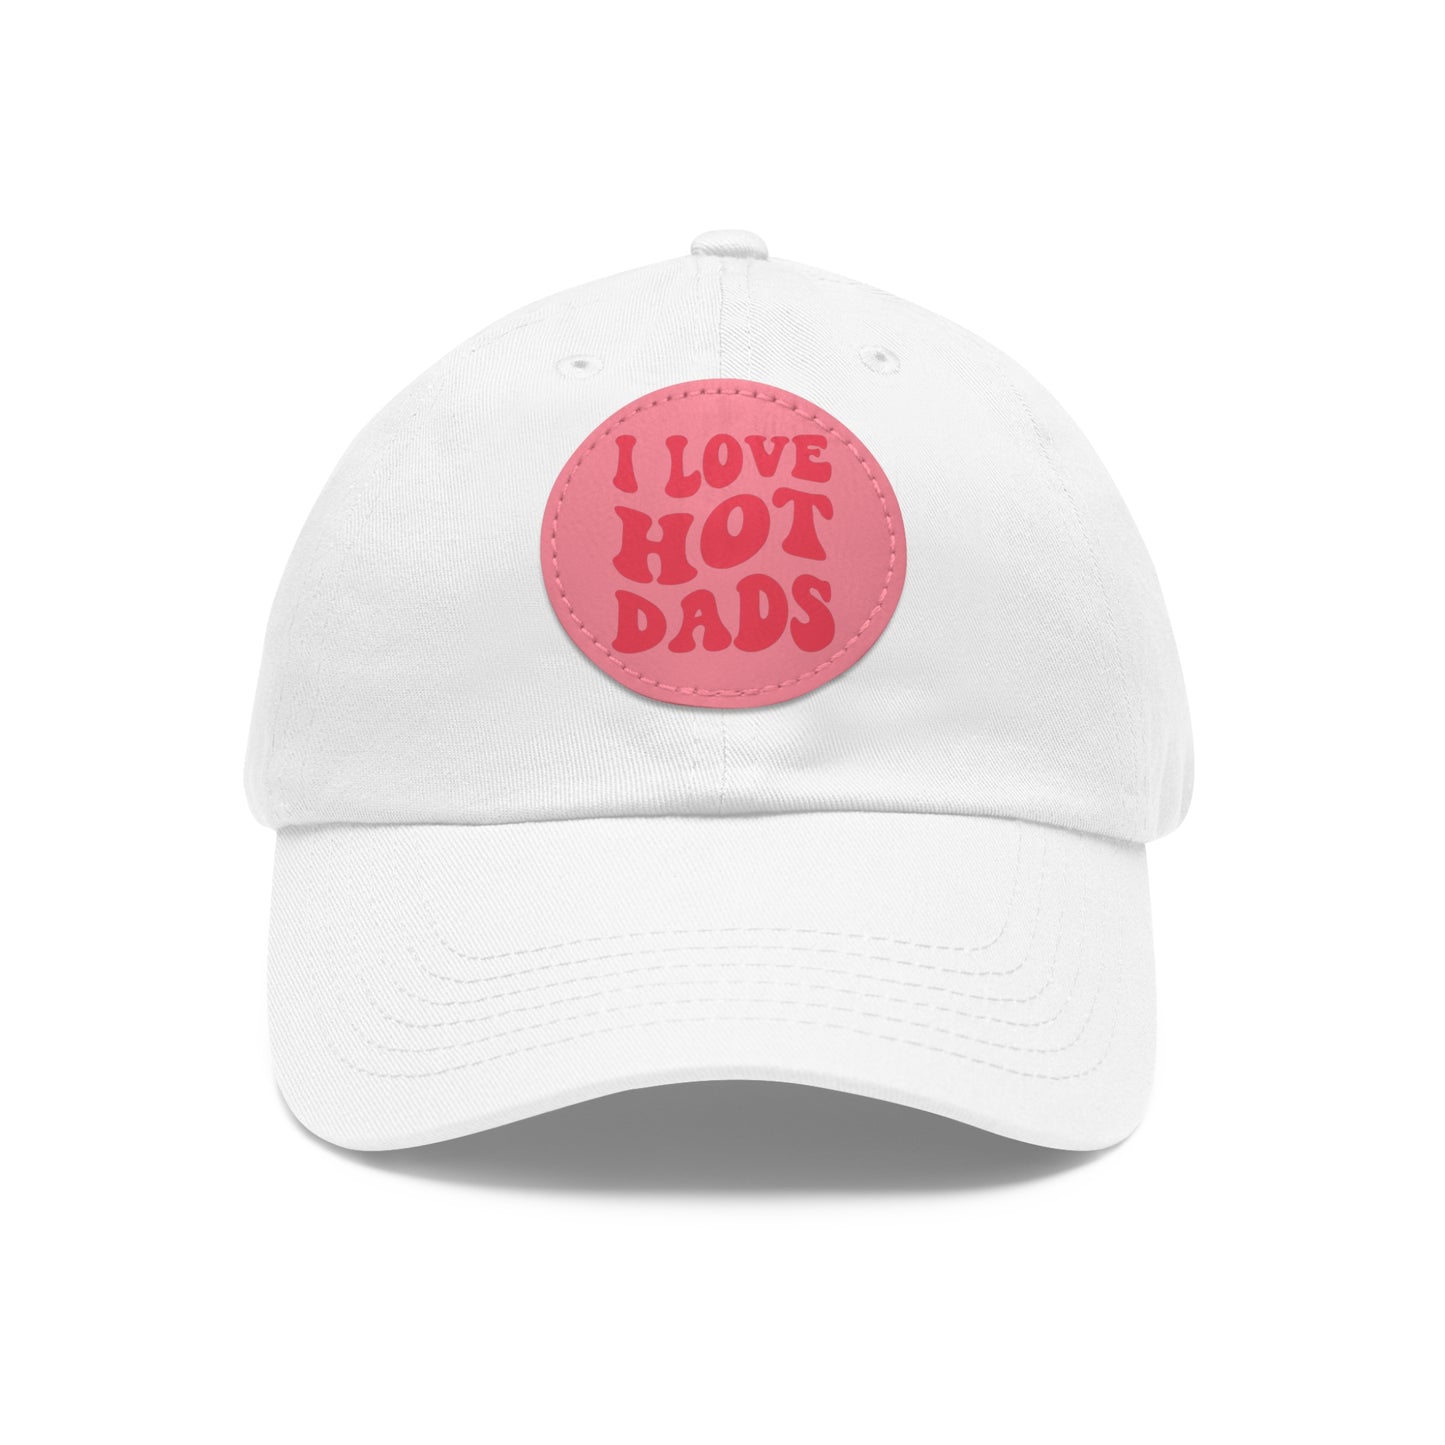 I Love Hot Dads Dad Hat with Leather Patch